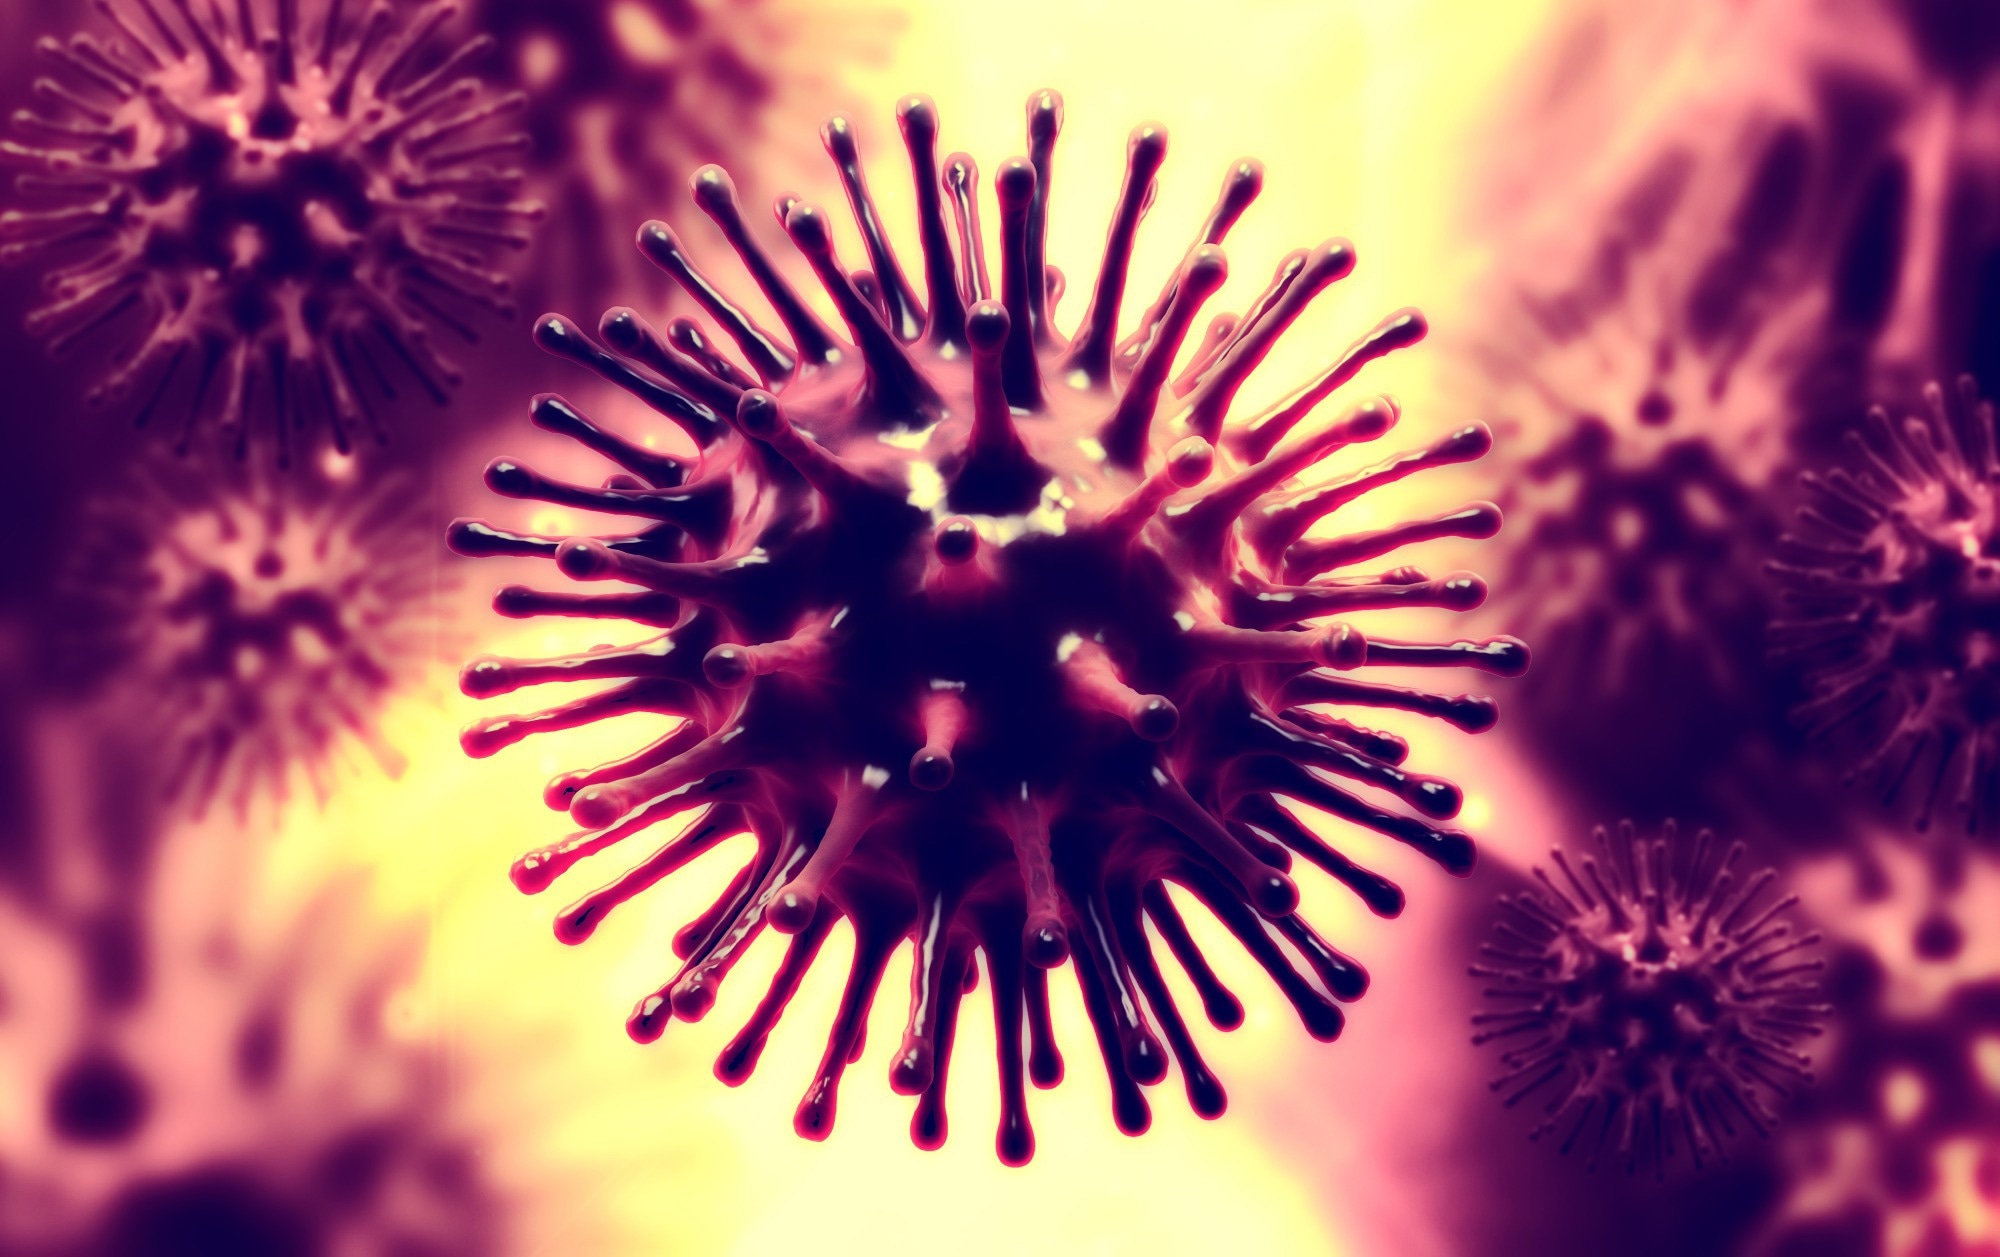 Study: Omicron-induced interferon signalling prevents influenza A virus infection. Image Credit: Liya Graphics / Shutterstock